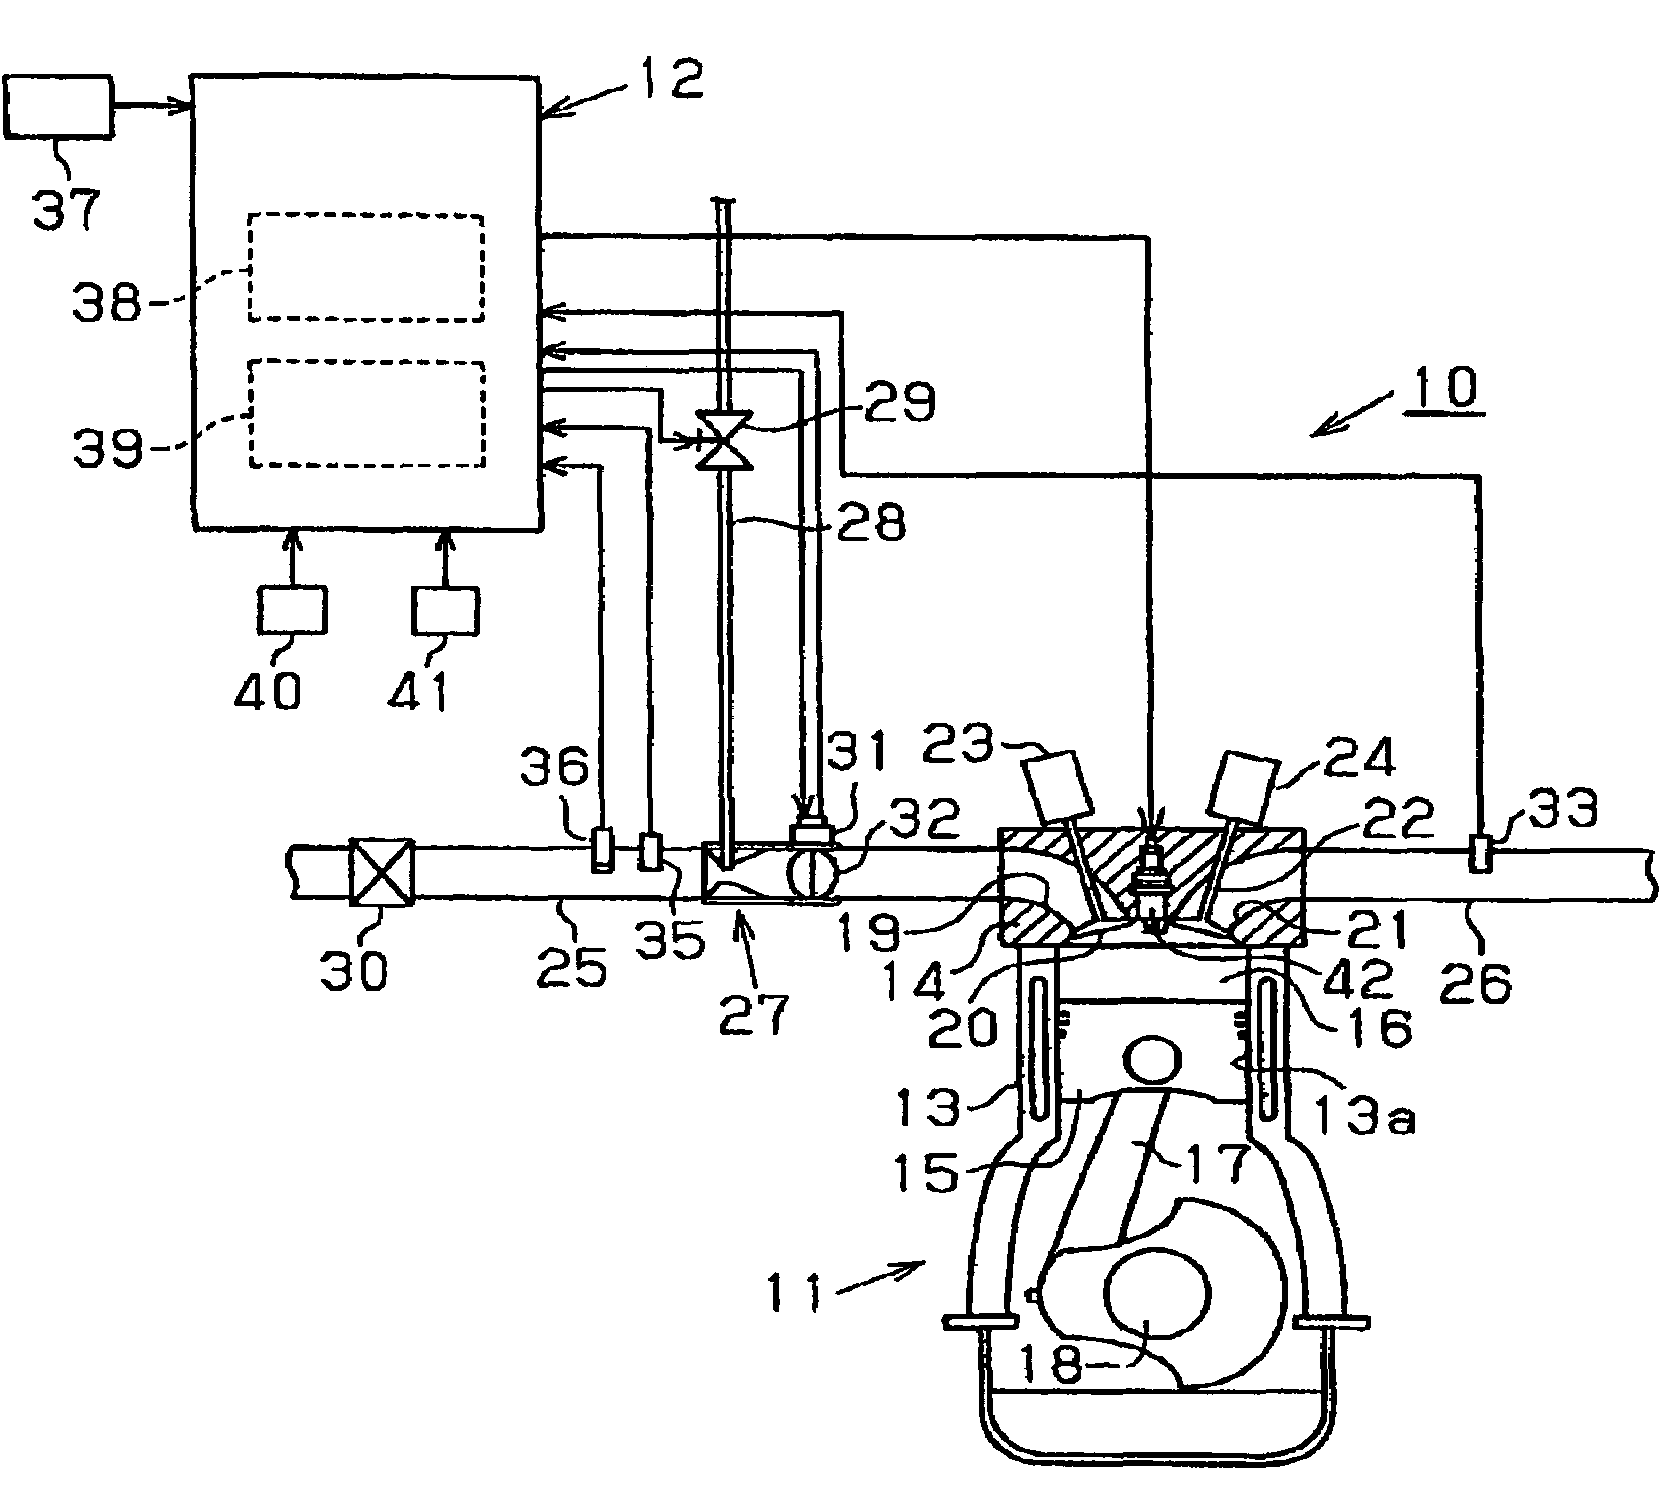 Homogeneous charge compression ignition engine and method for operating homogeneous charge compression ignition engine